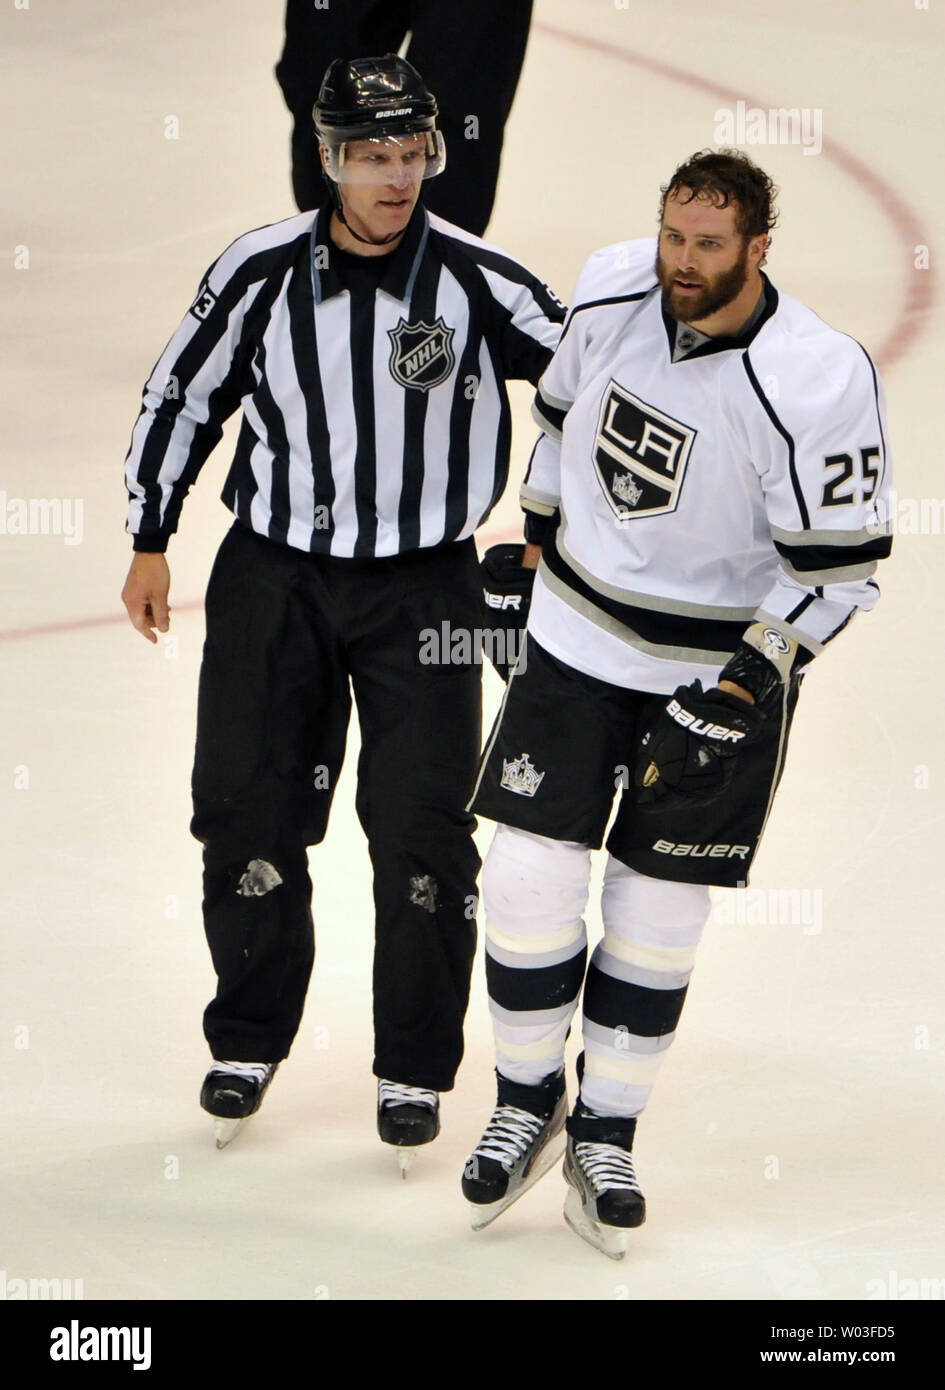 Evgeni Malkin And Brenden Dillon Keep Fighting As Referee Tries To